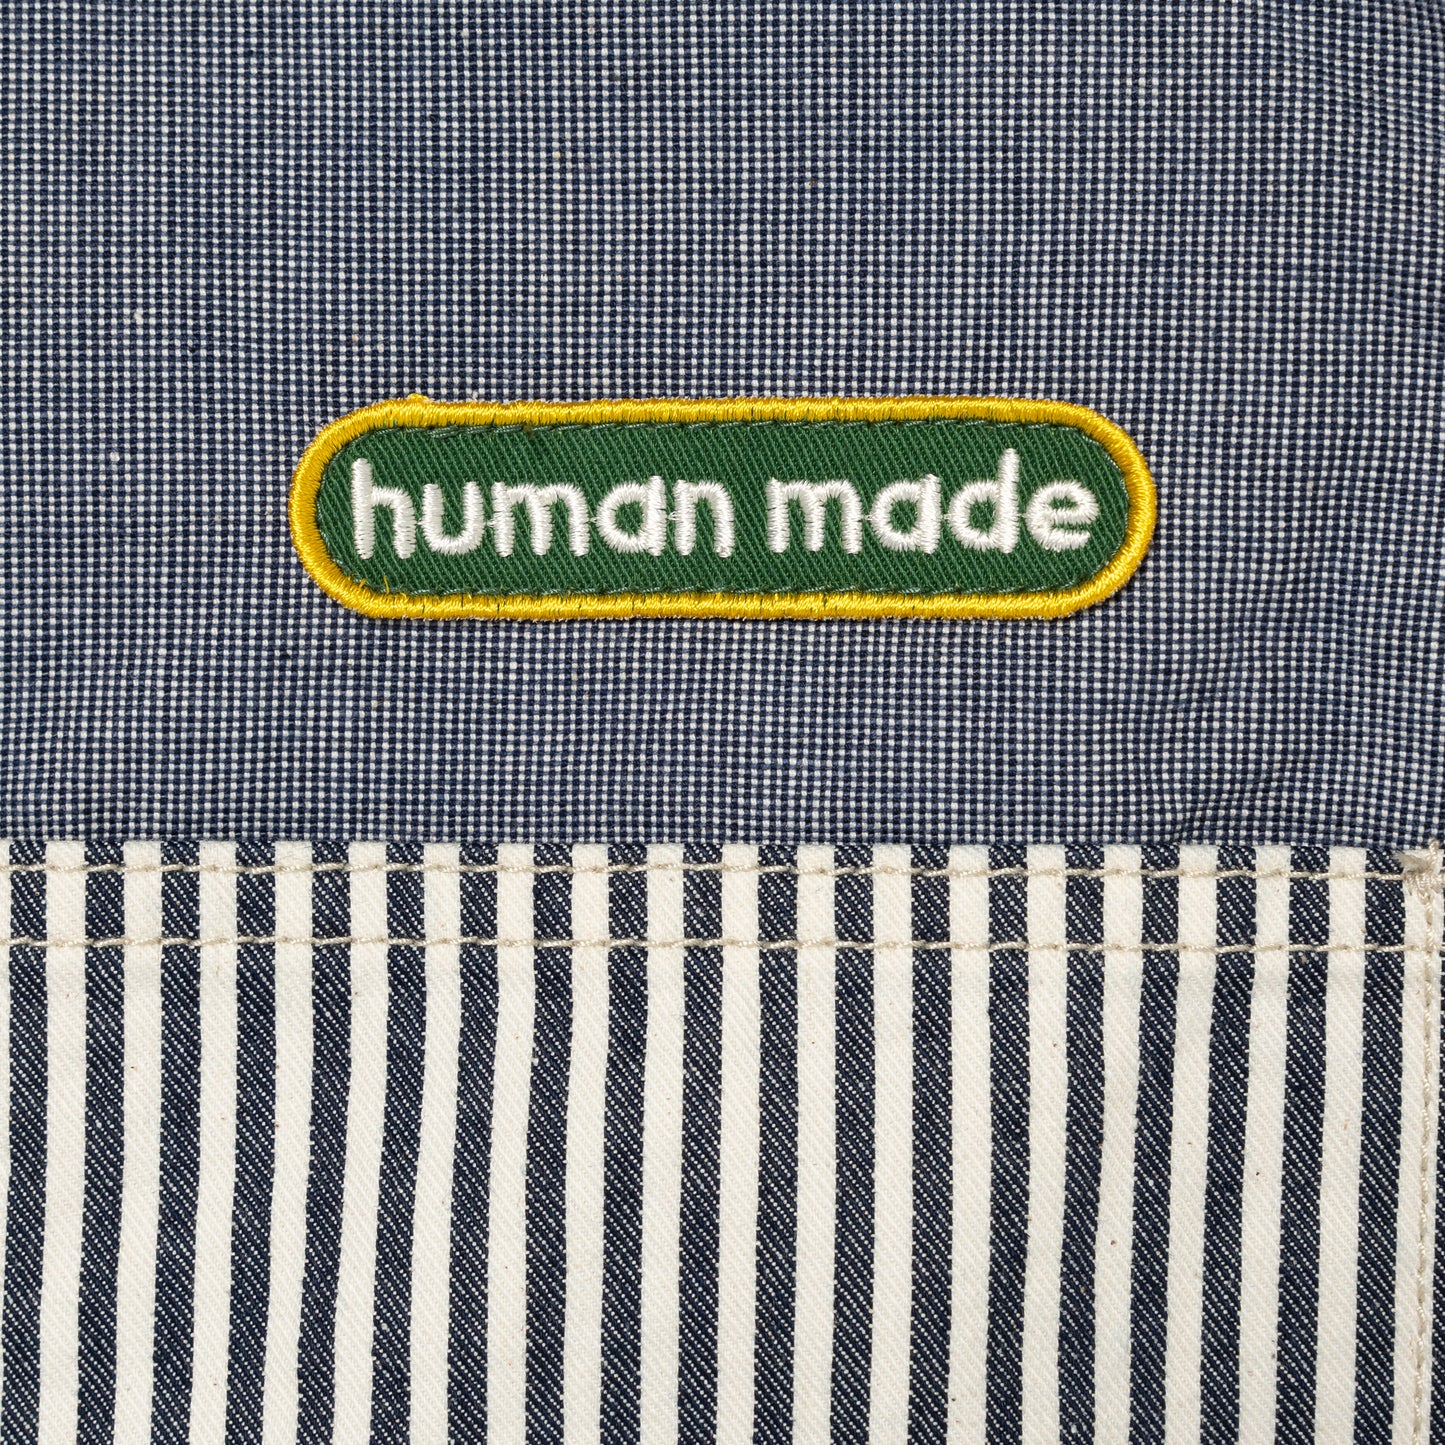 HUMAN MADE CRAZY COVERALL JACKET #2 IN-C